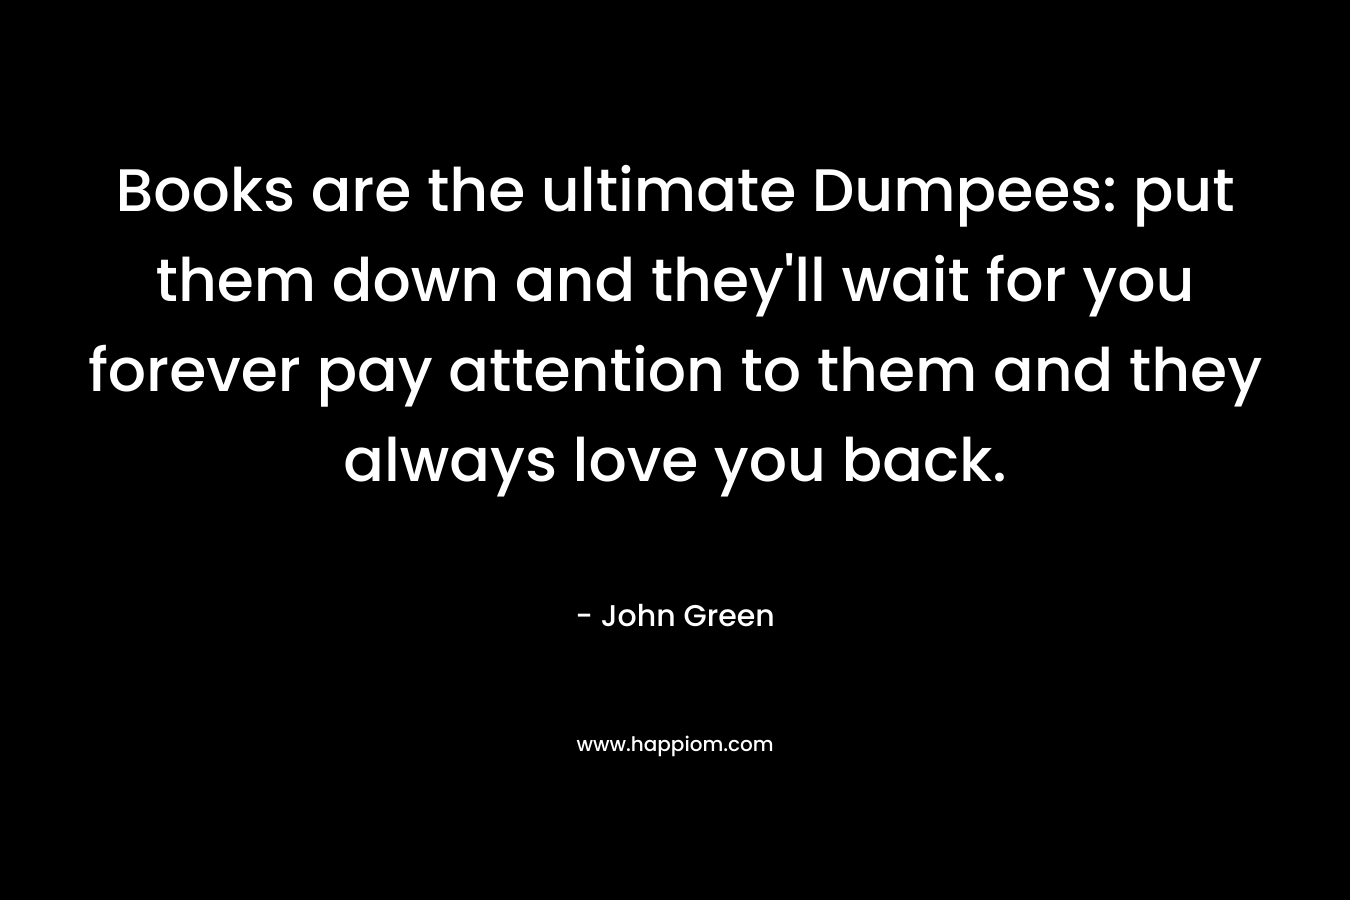 Books are the ultimate Dumpees: put them down and they’ll wait for you forever pay attention to them and they always love you back. – John Green